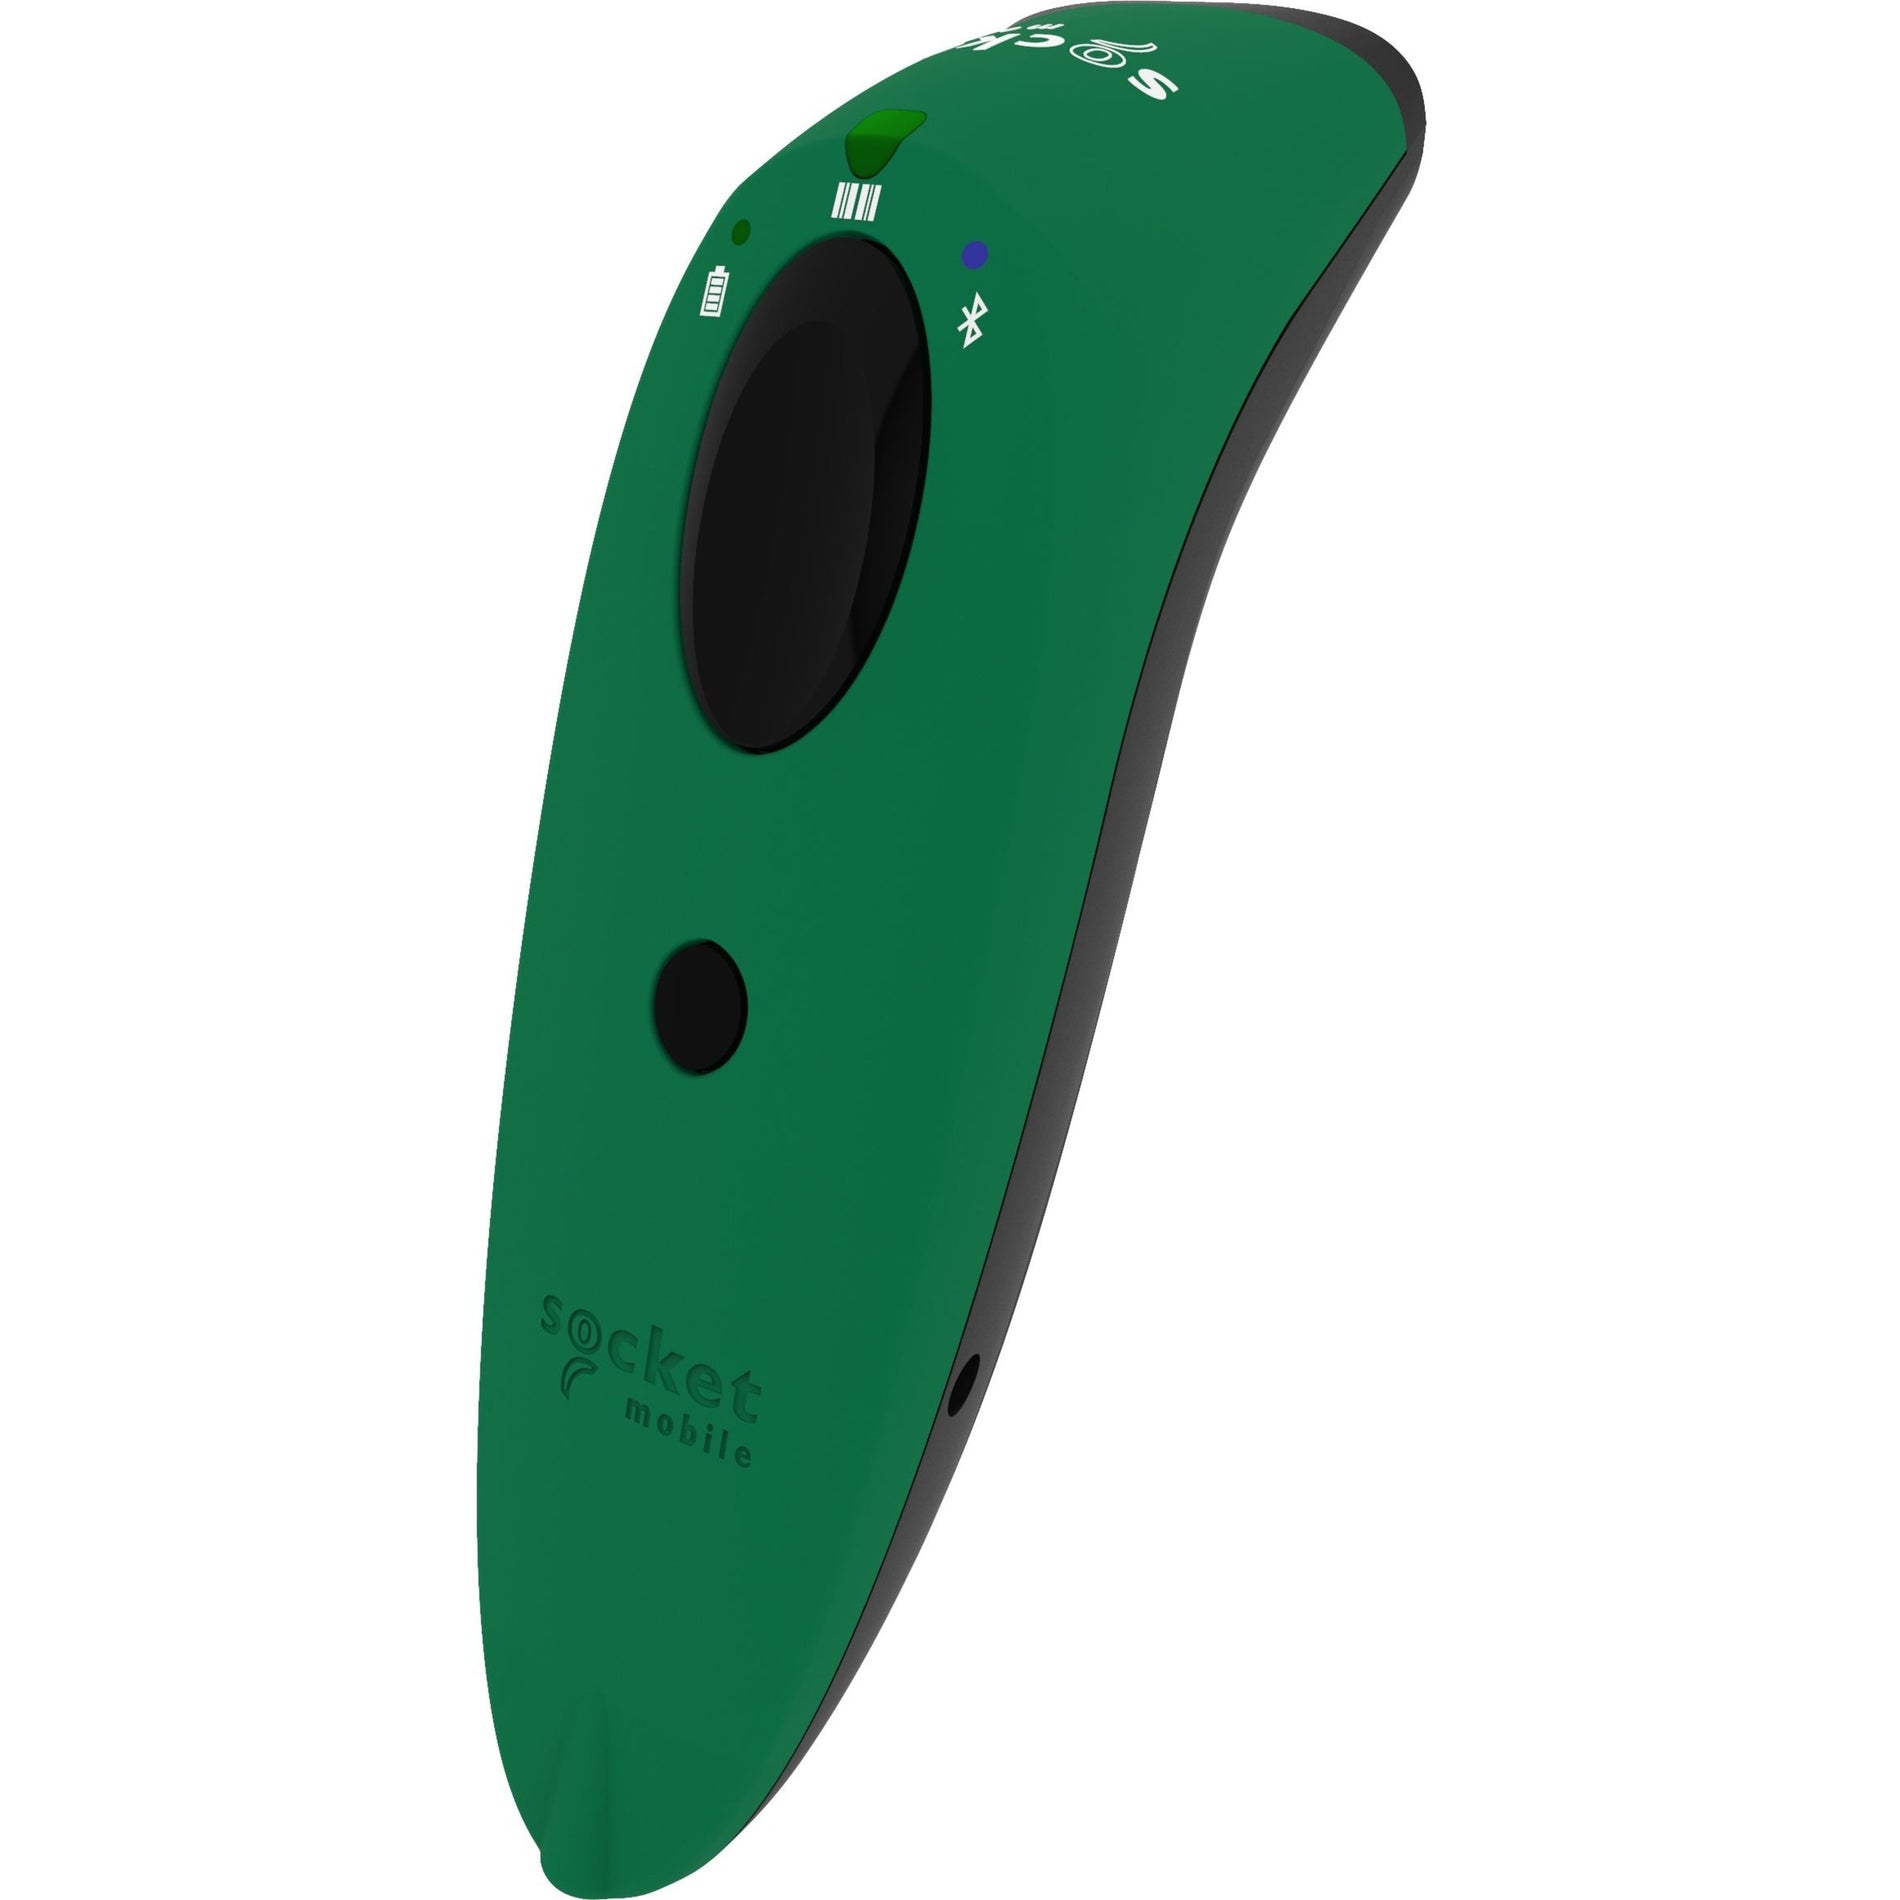 Socket Mobile CX3980-3037 SocketScan S720 Linear Barcode Plus QR Code Reader, Green - Wireless Handheld Scanner for Transportation, Ticketing, Hospitality, Inventory, and More